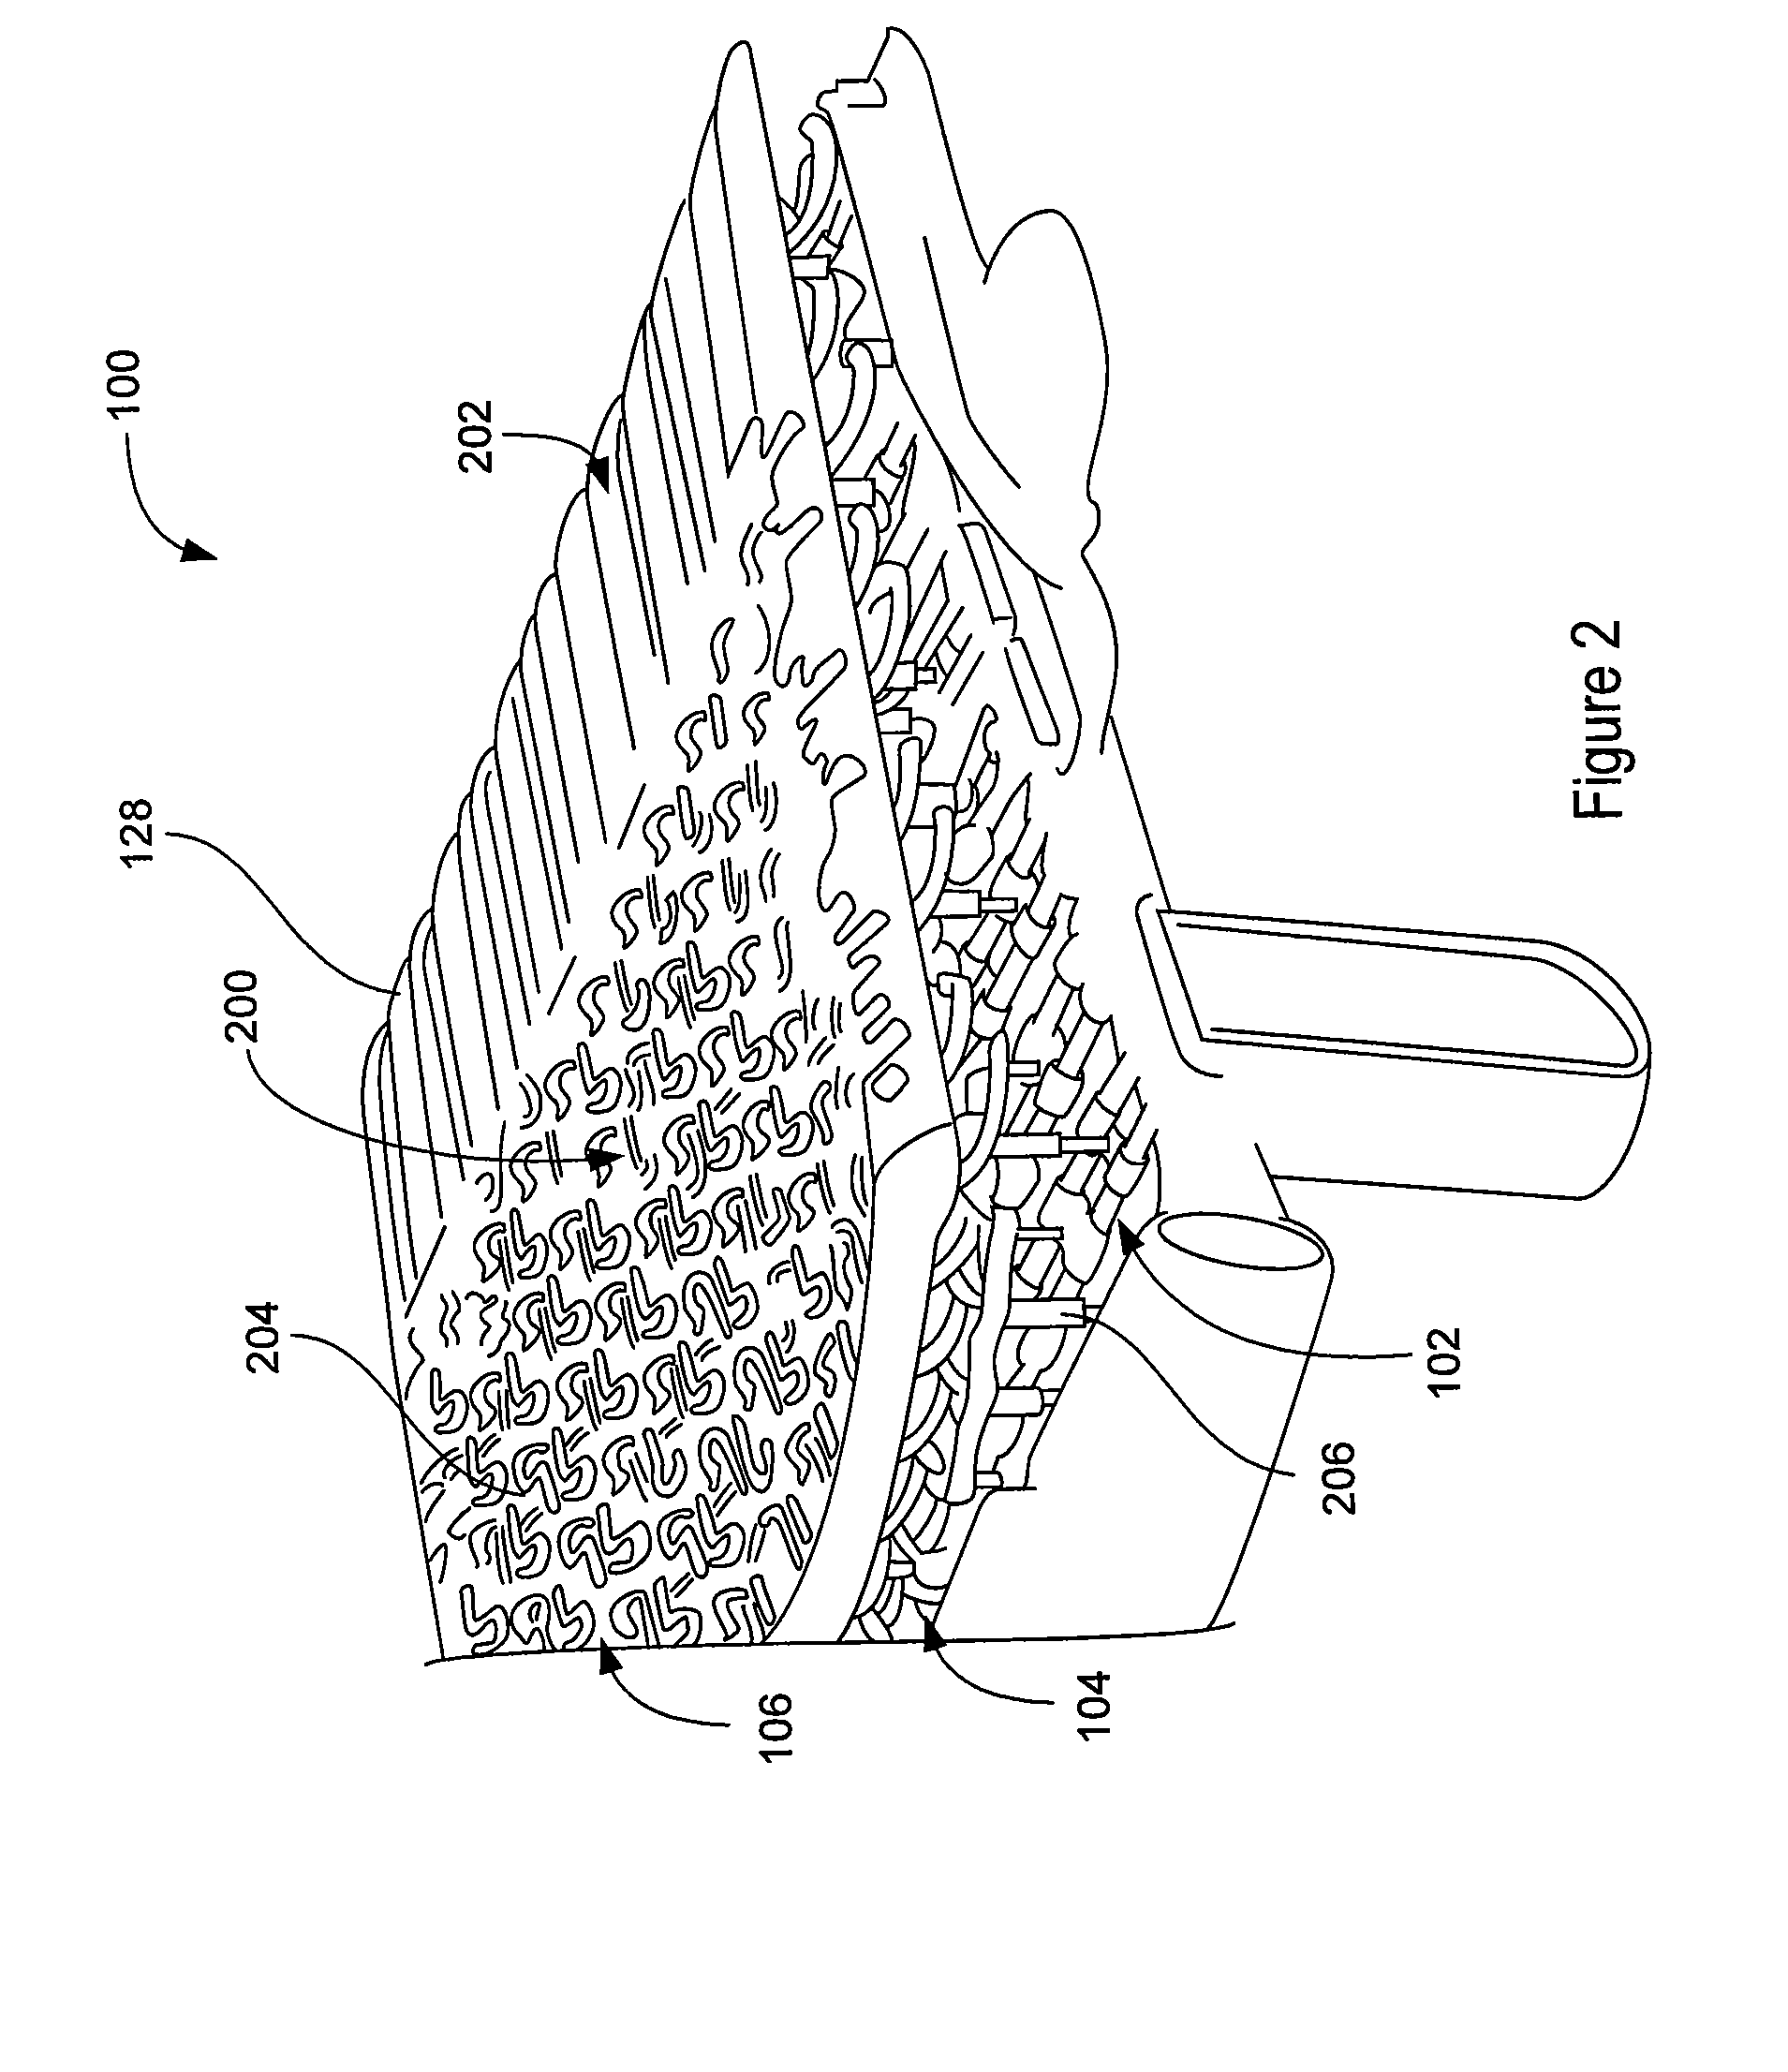 Multi-layered support structure